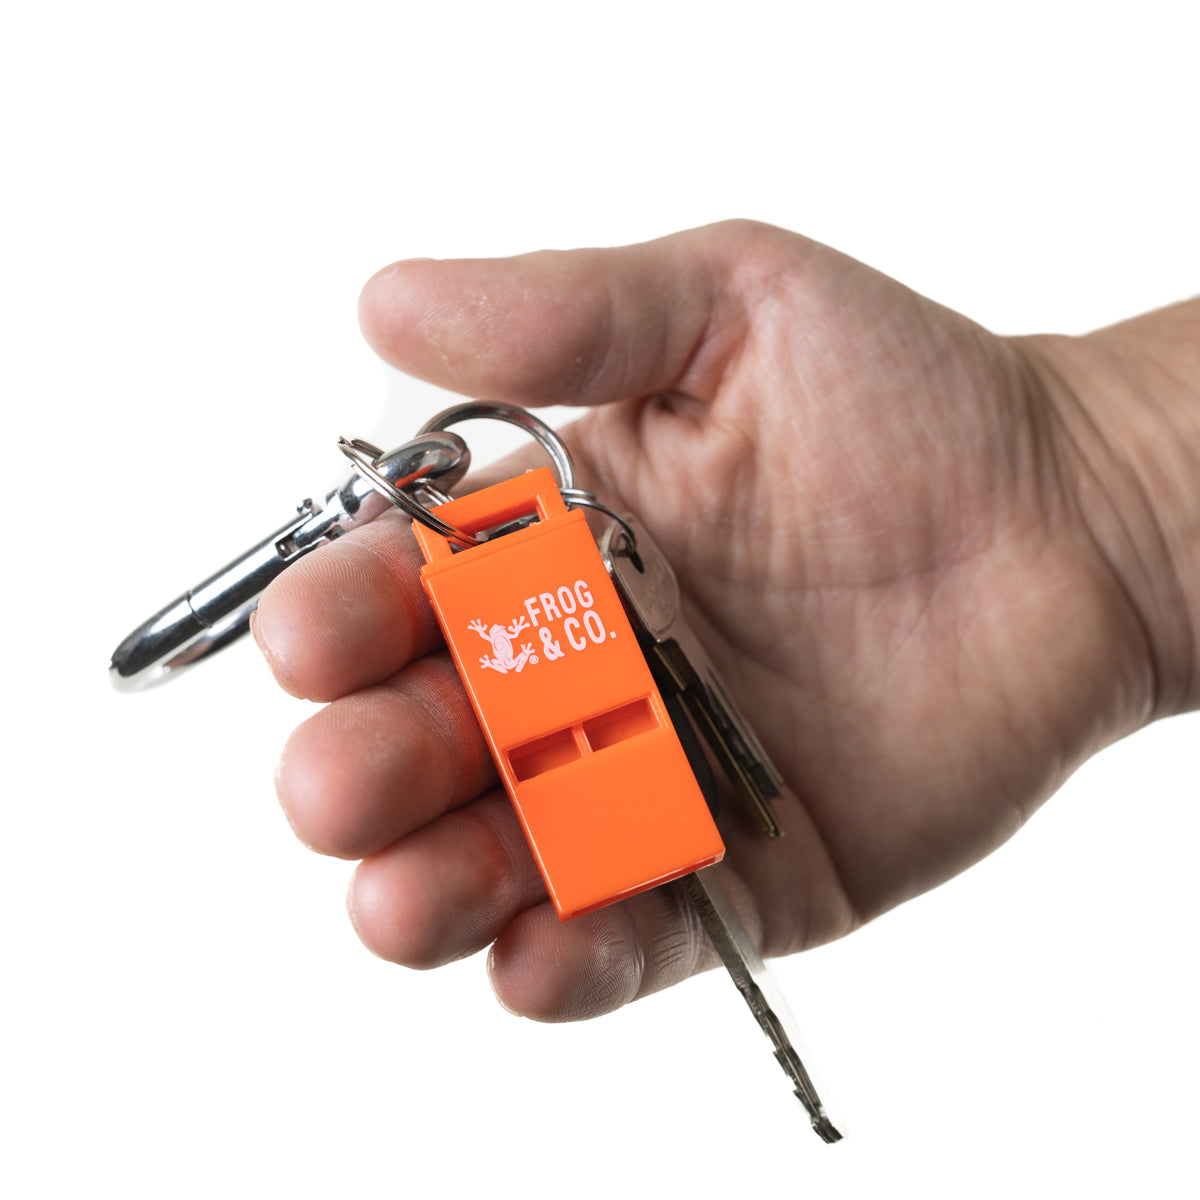 Orange Scream Whistle hooked in key chain in hand with white background